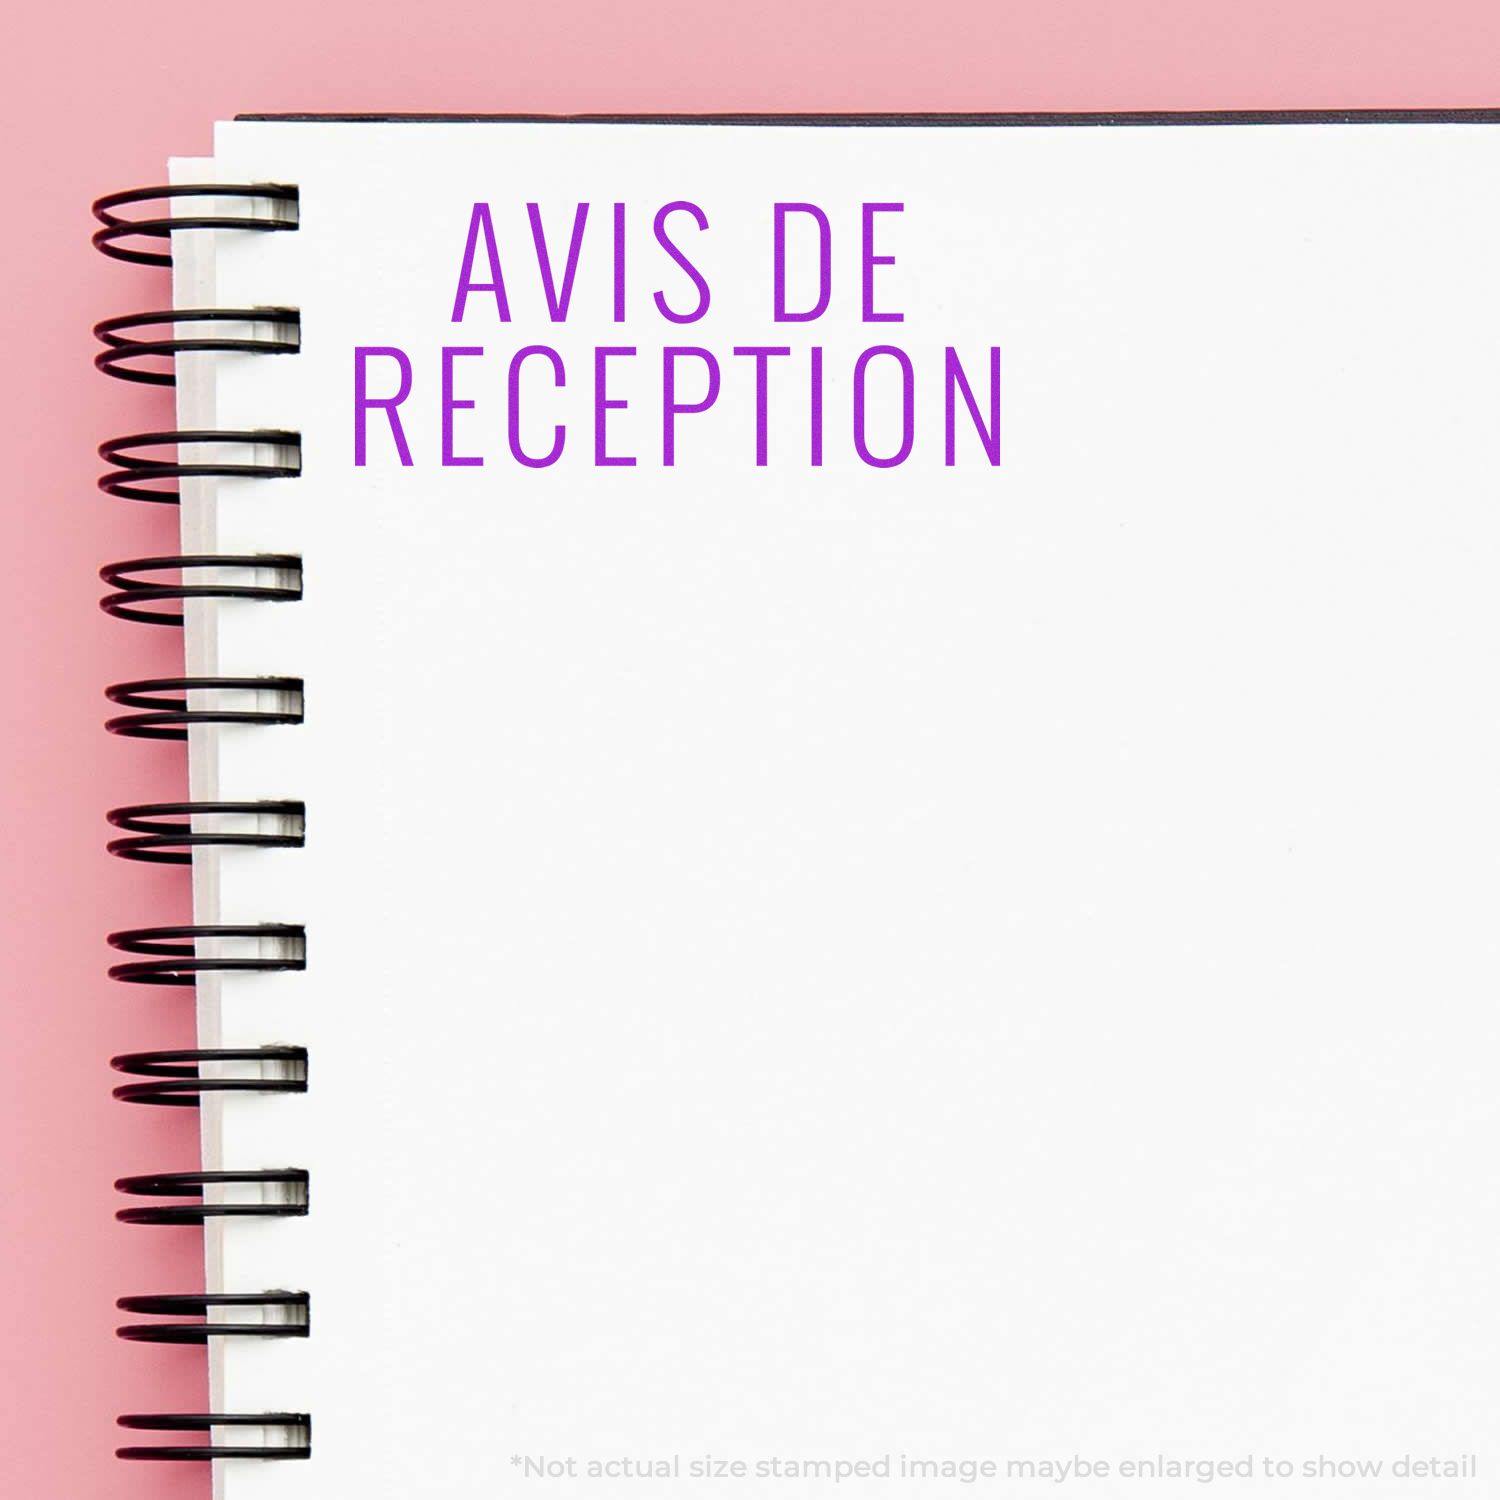 A stock office rubber stamp with a stamped image showing how the text "AVIS DE RECEPTION" is displayed after stamping.